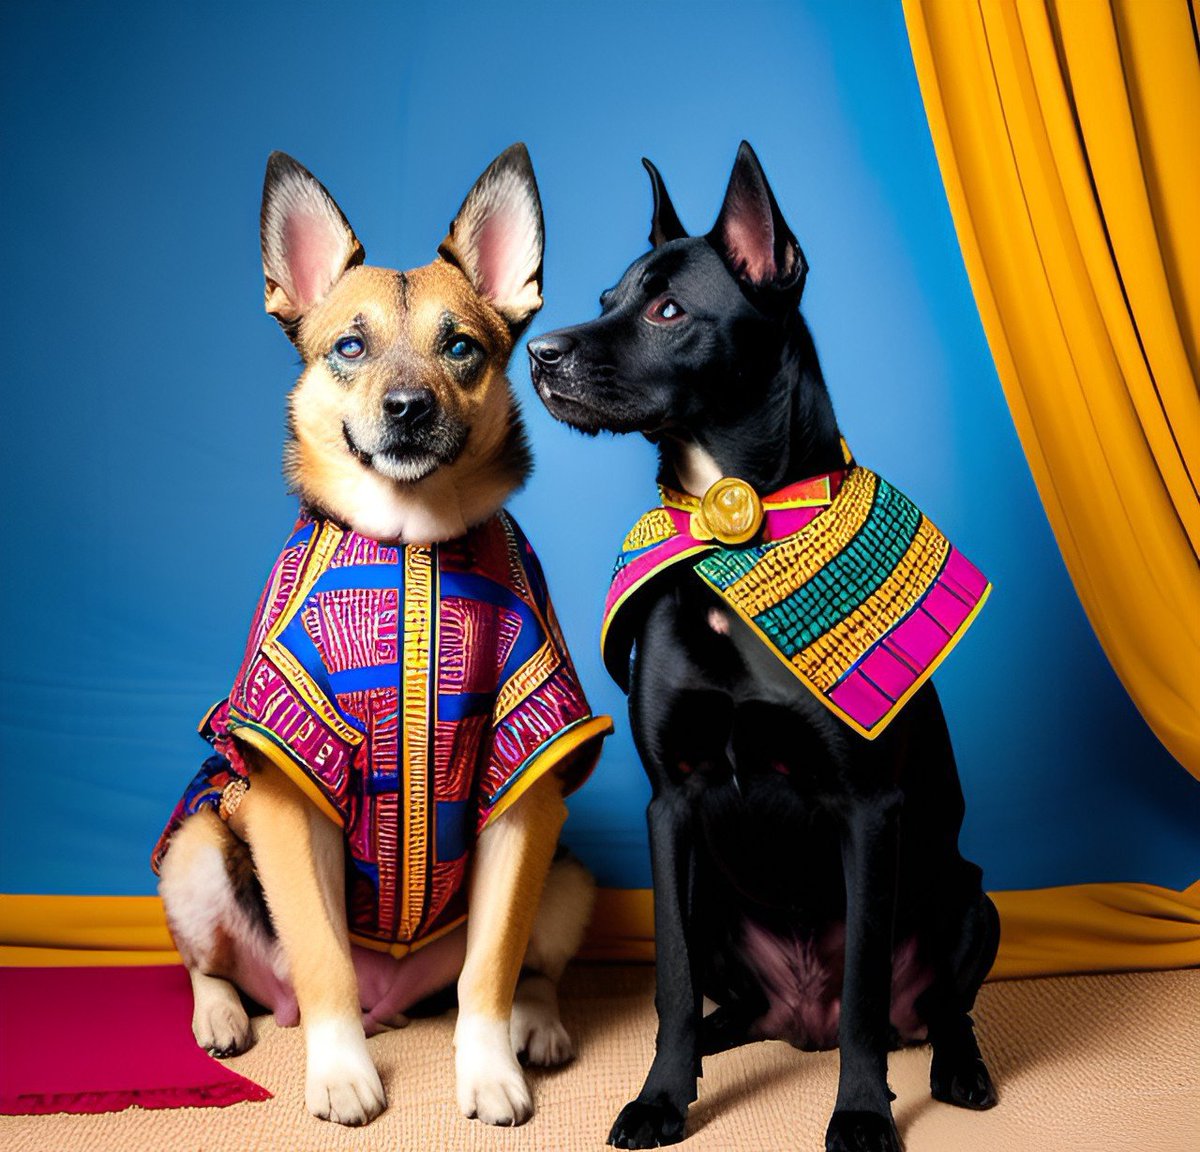 AI Generated art of Two dogs wearing African attire. 

#AIart #AIArtwork #aiartcommunity #AIArtistCommunity #NFTCommunity #NFTs #aiartist #BreakingNews #SupremeCourt #Otedola #Section299 #Declanrice #nairamarley #Obidients #Portable #Rufai #NigeriaAir #Kcee